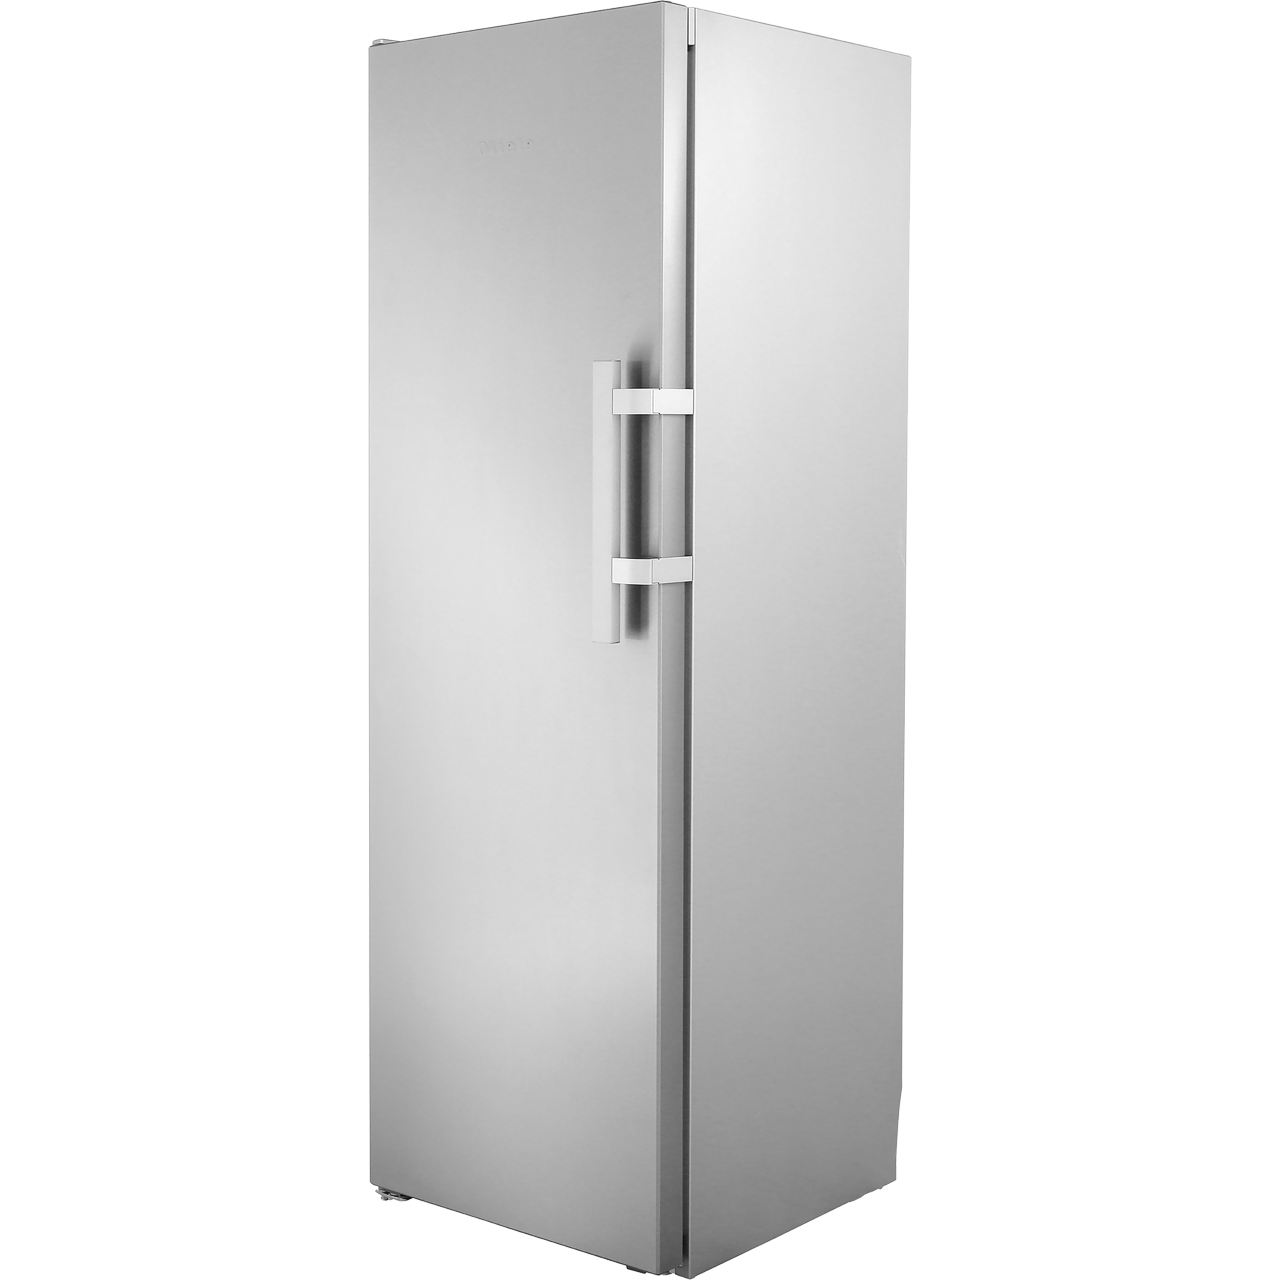 Miele FN28262edt/cs Frost Free Upright Freezer Review